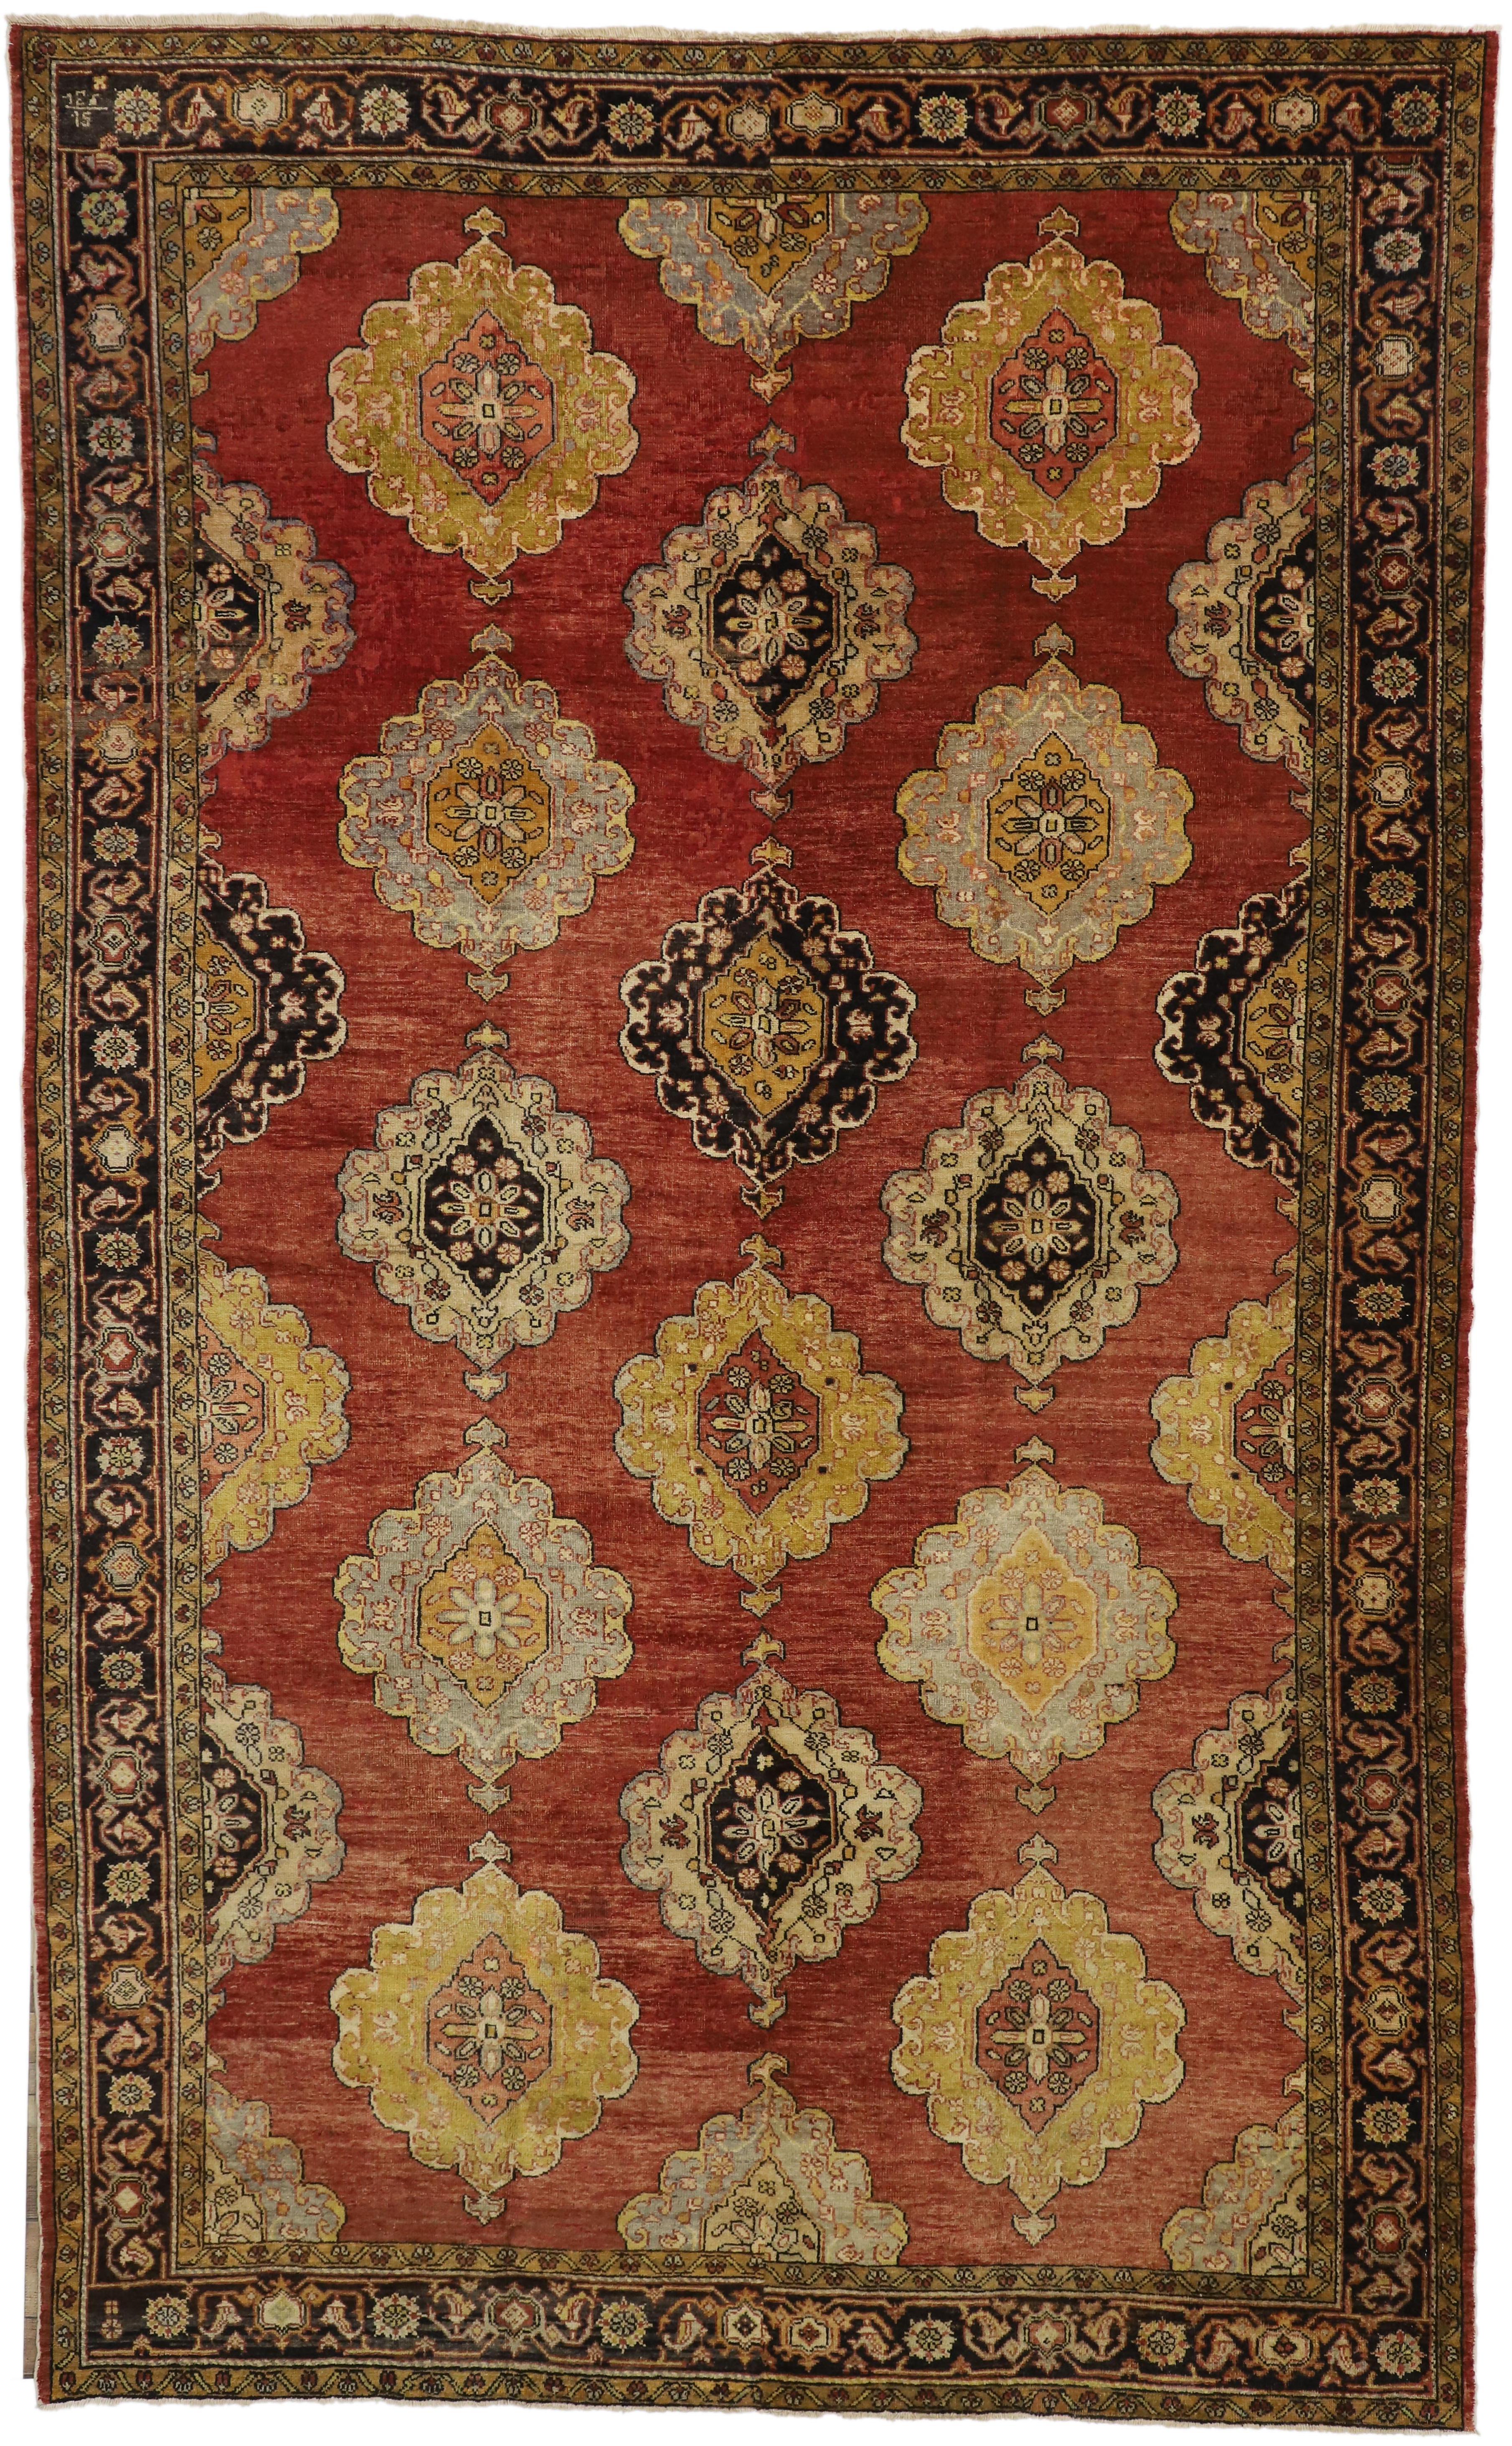 51294 Vintage Turkish Oushak Area Rug with Luxe Jacobean Style. This hand-knotted wool vintage Turkish Oushak rug features three vertical columns of cusped medallions flanked with small anchor tips at either end. Scalloped edged ziggurats protrude